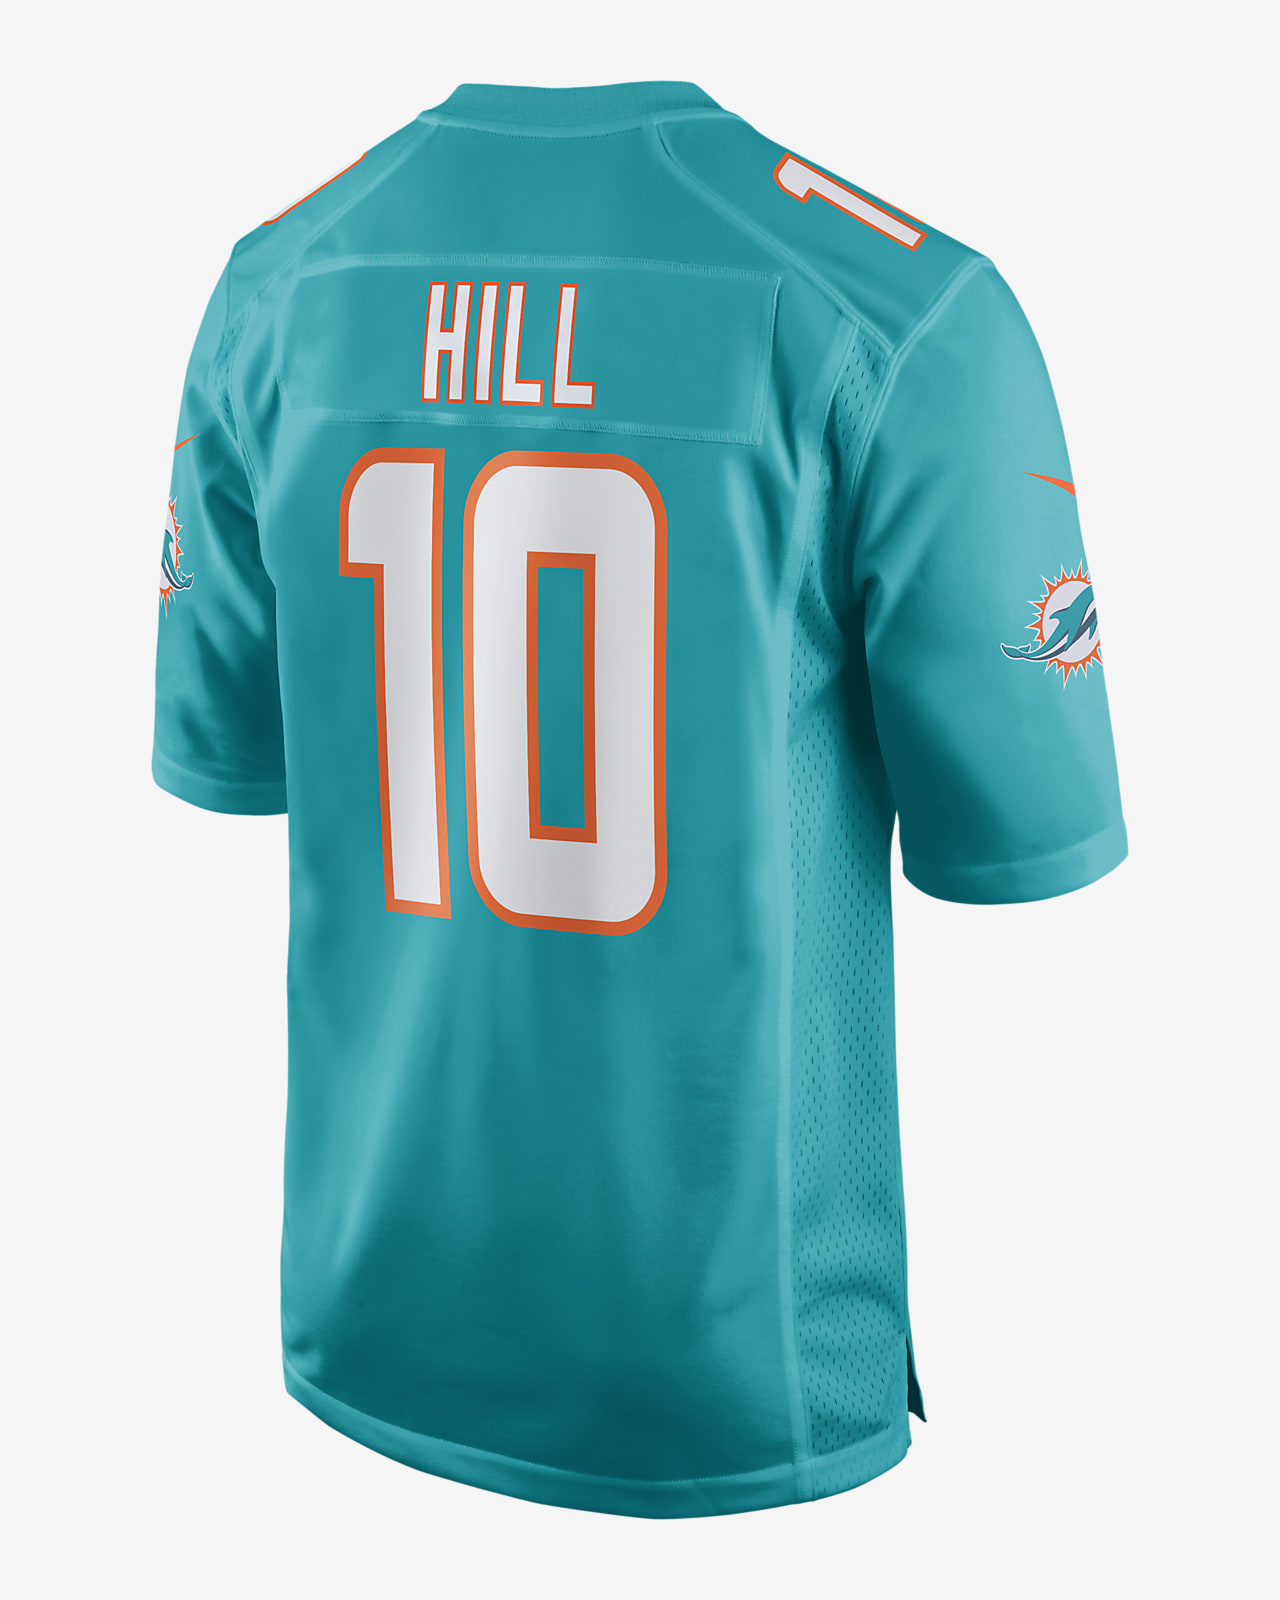 Moeras Storing Imperial NFL Miami Dolphins (Tyreek Hill) Men's Game Football Jersey. Nike.com